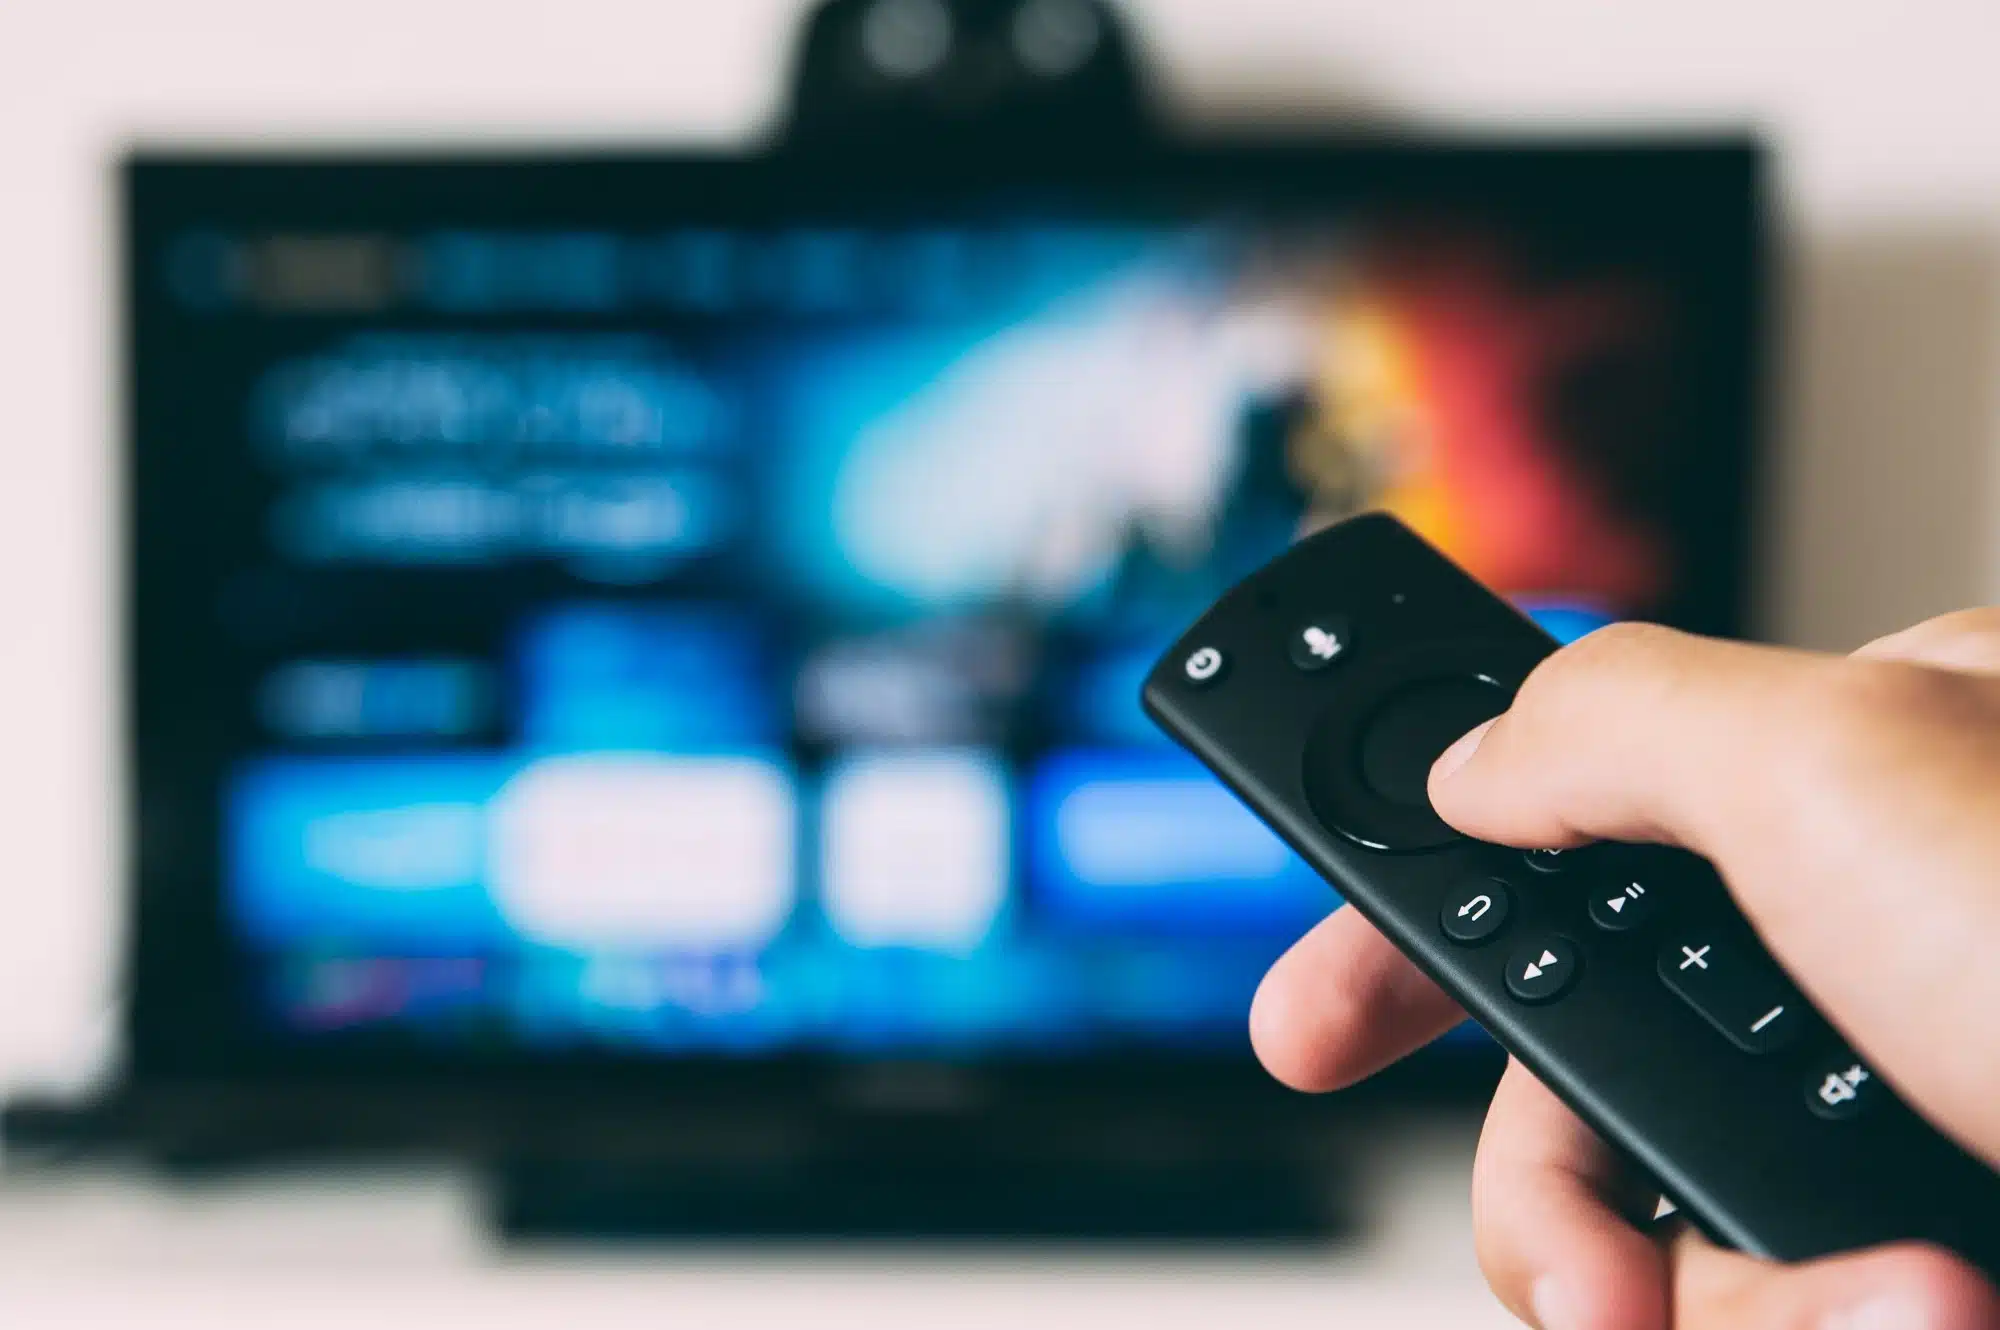 A person holding a remote while flicking through the movies on television, representing the concept of entertainment FBT.